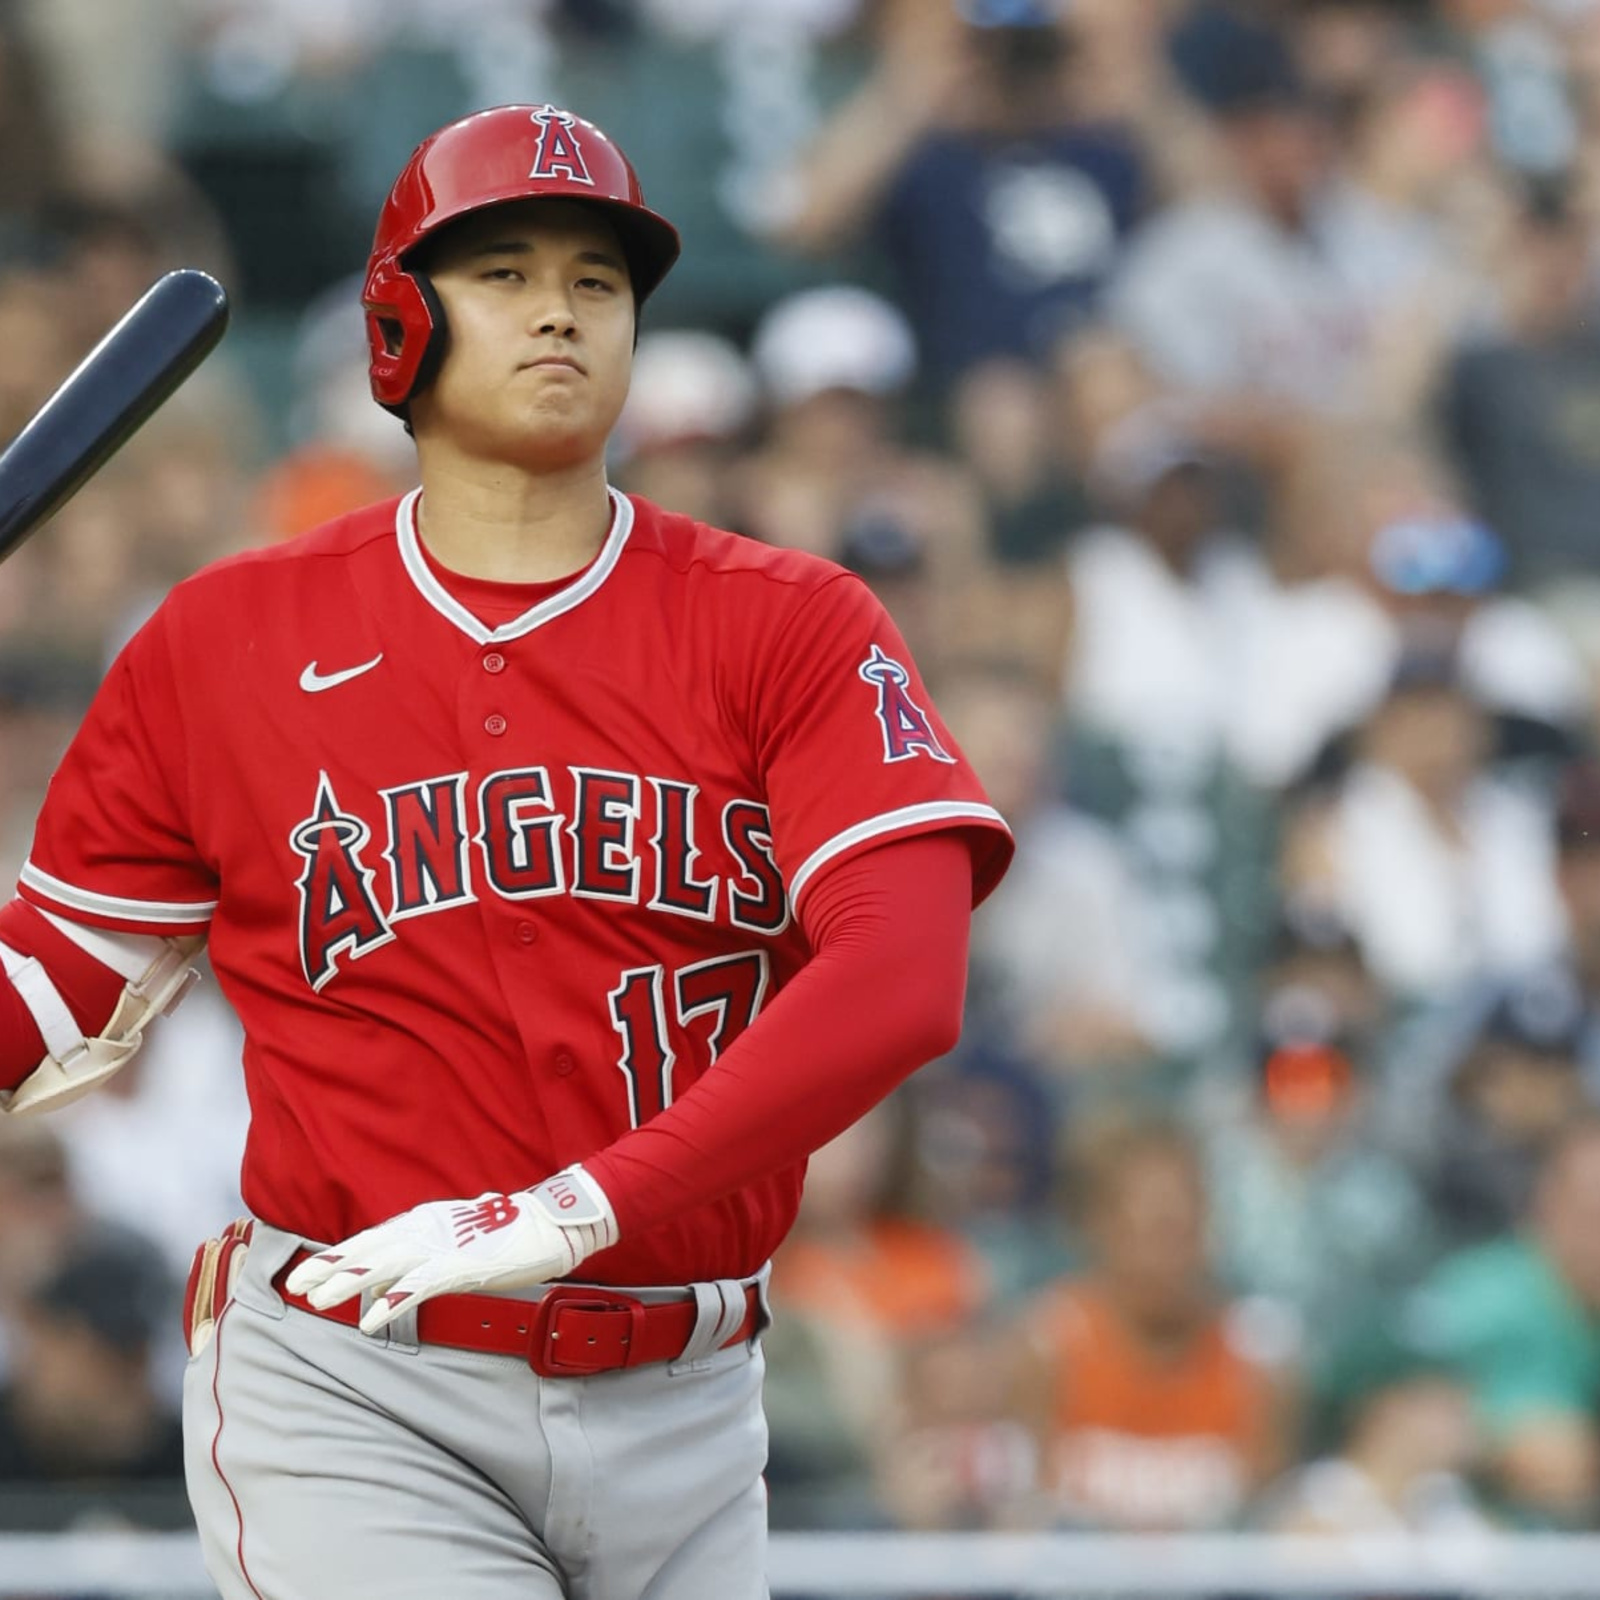 Two-way phenom Shohei Ohtani could be one of Mets top deals along